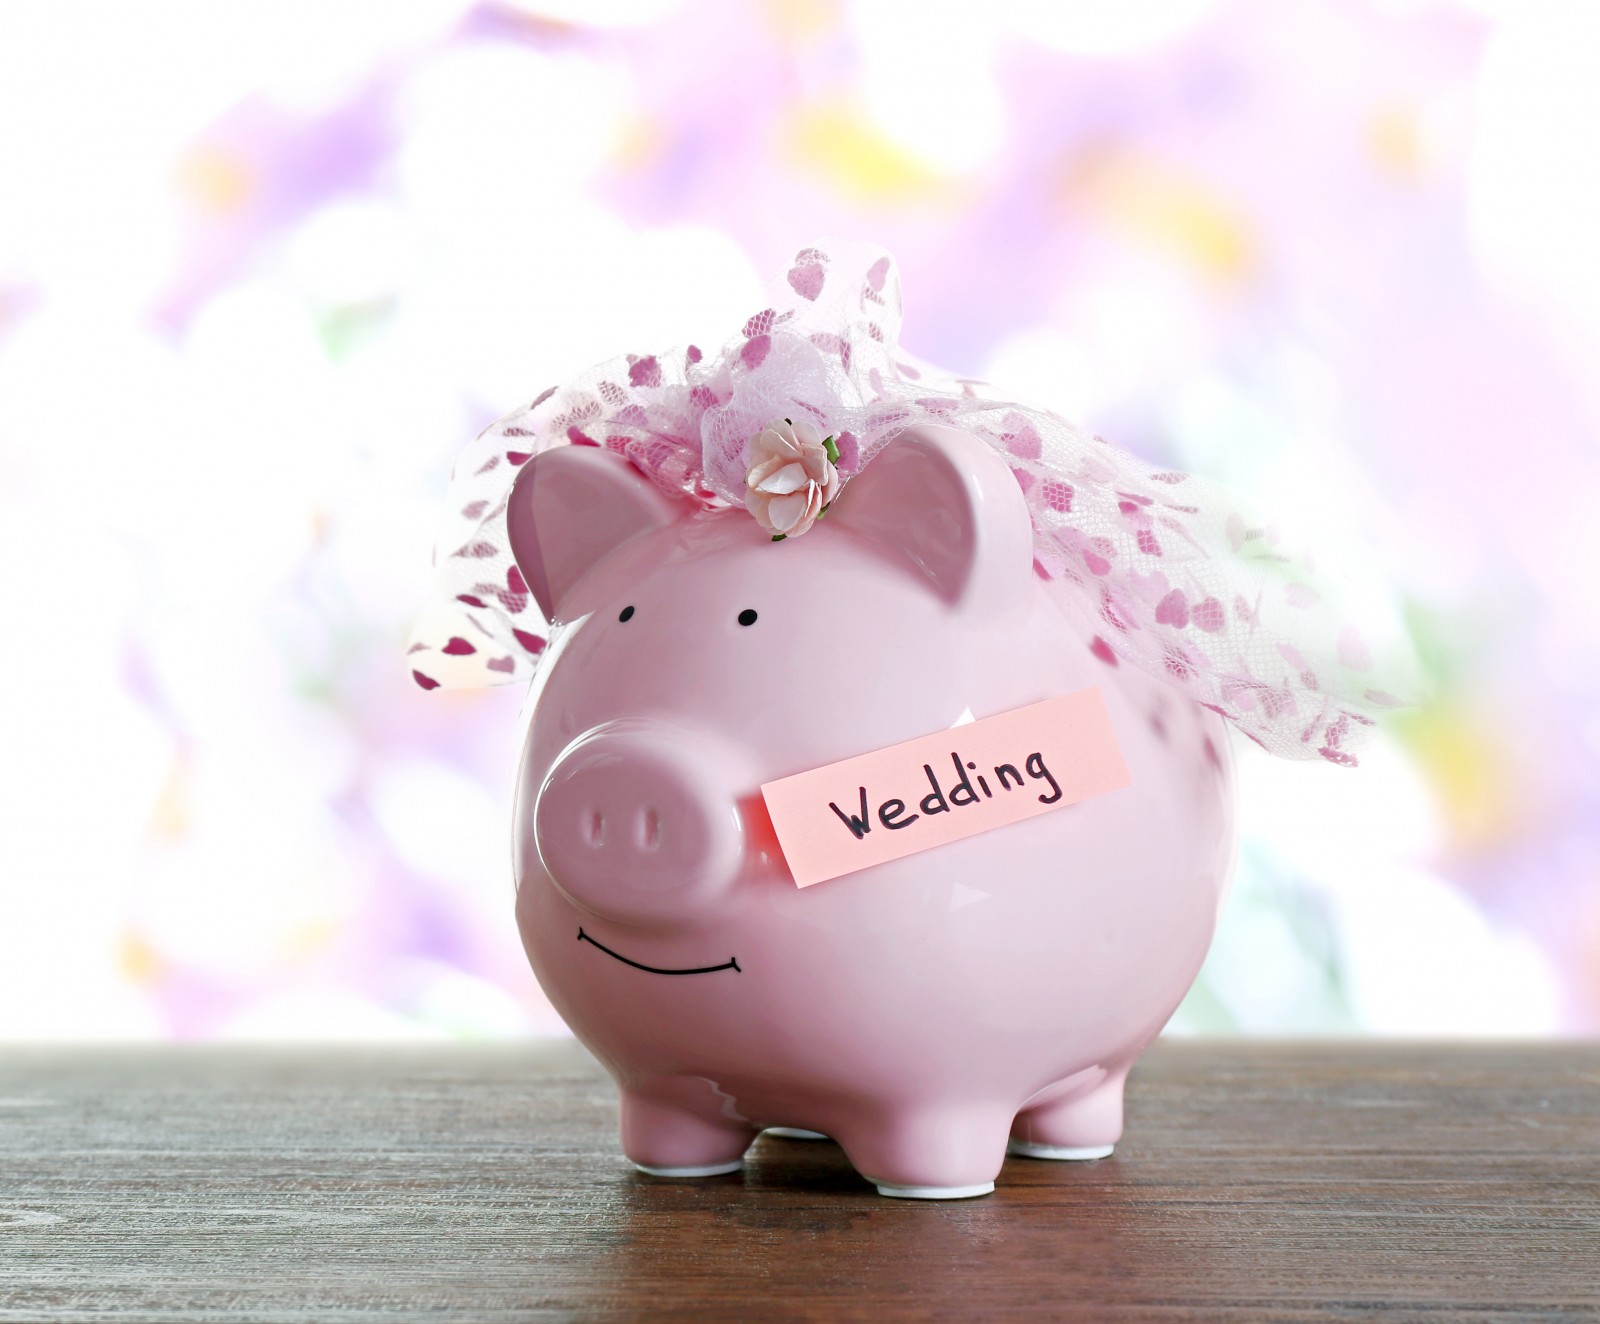 Budgeting for your wedding